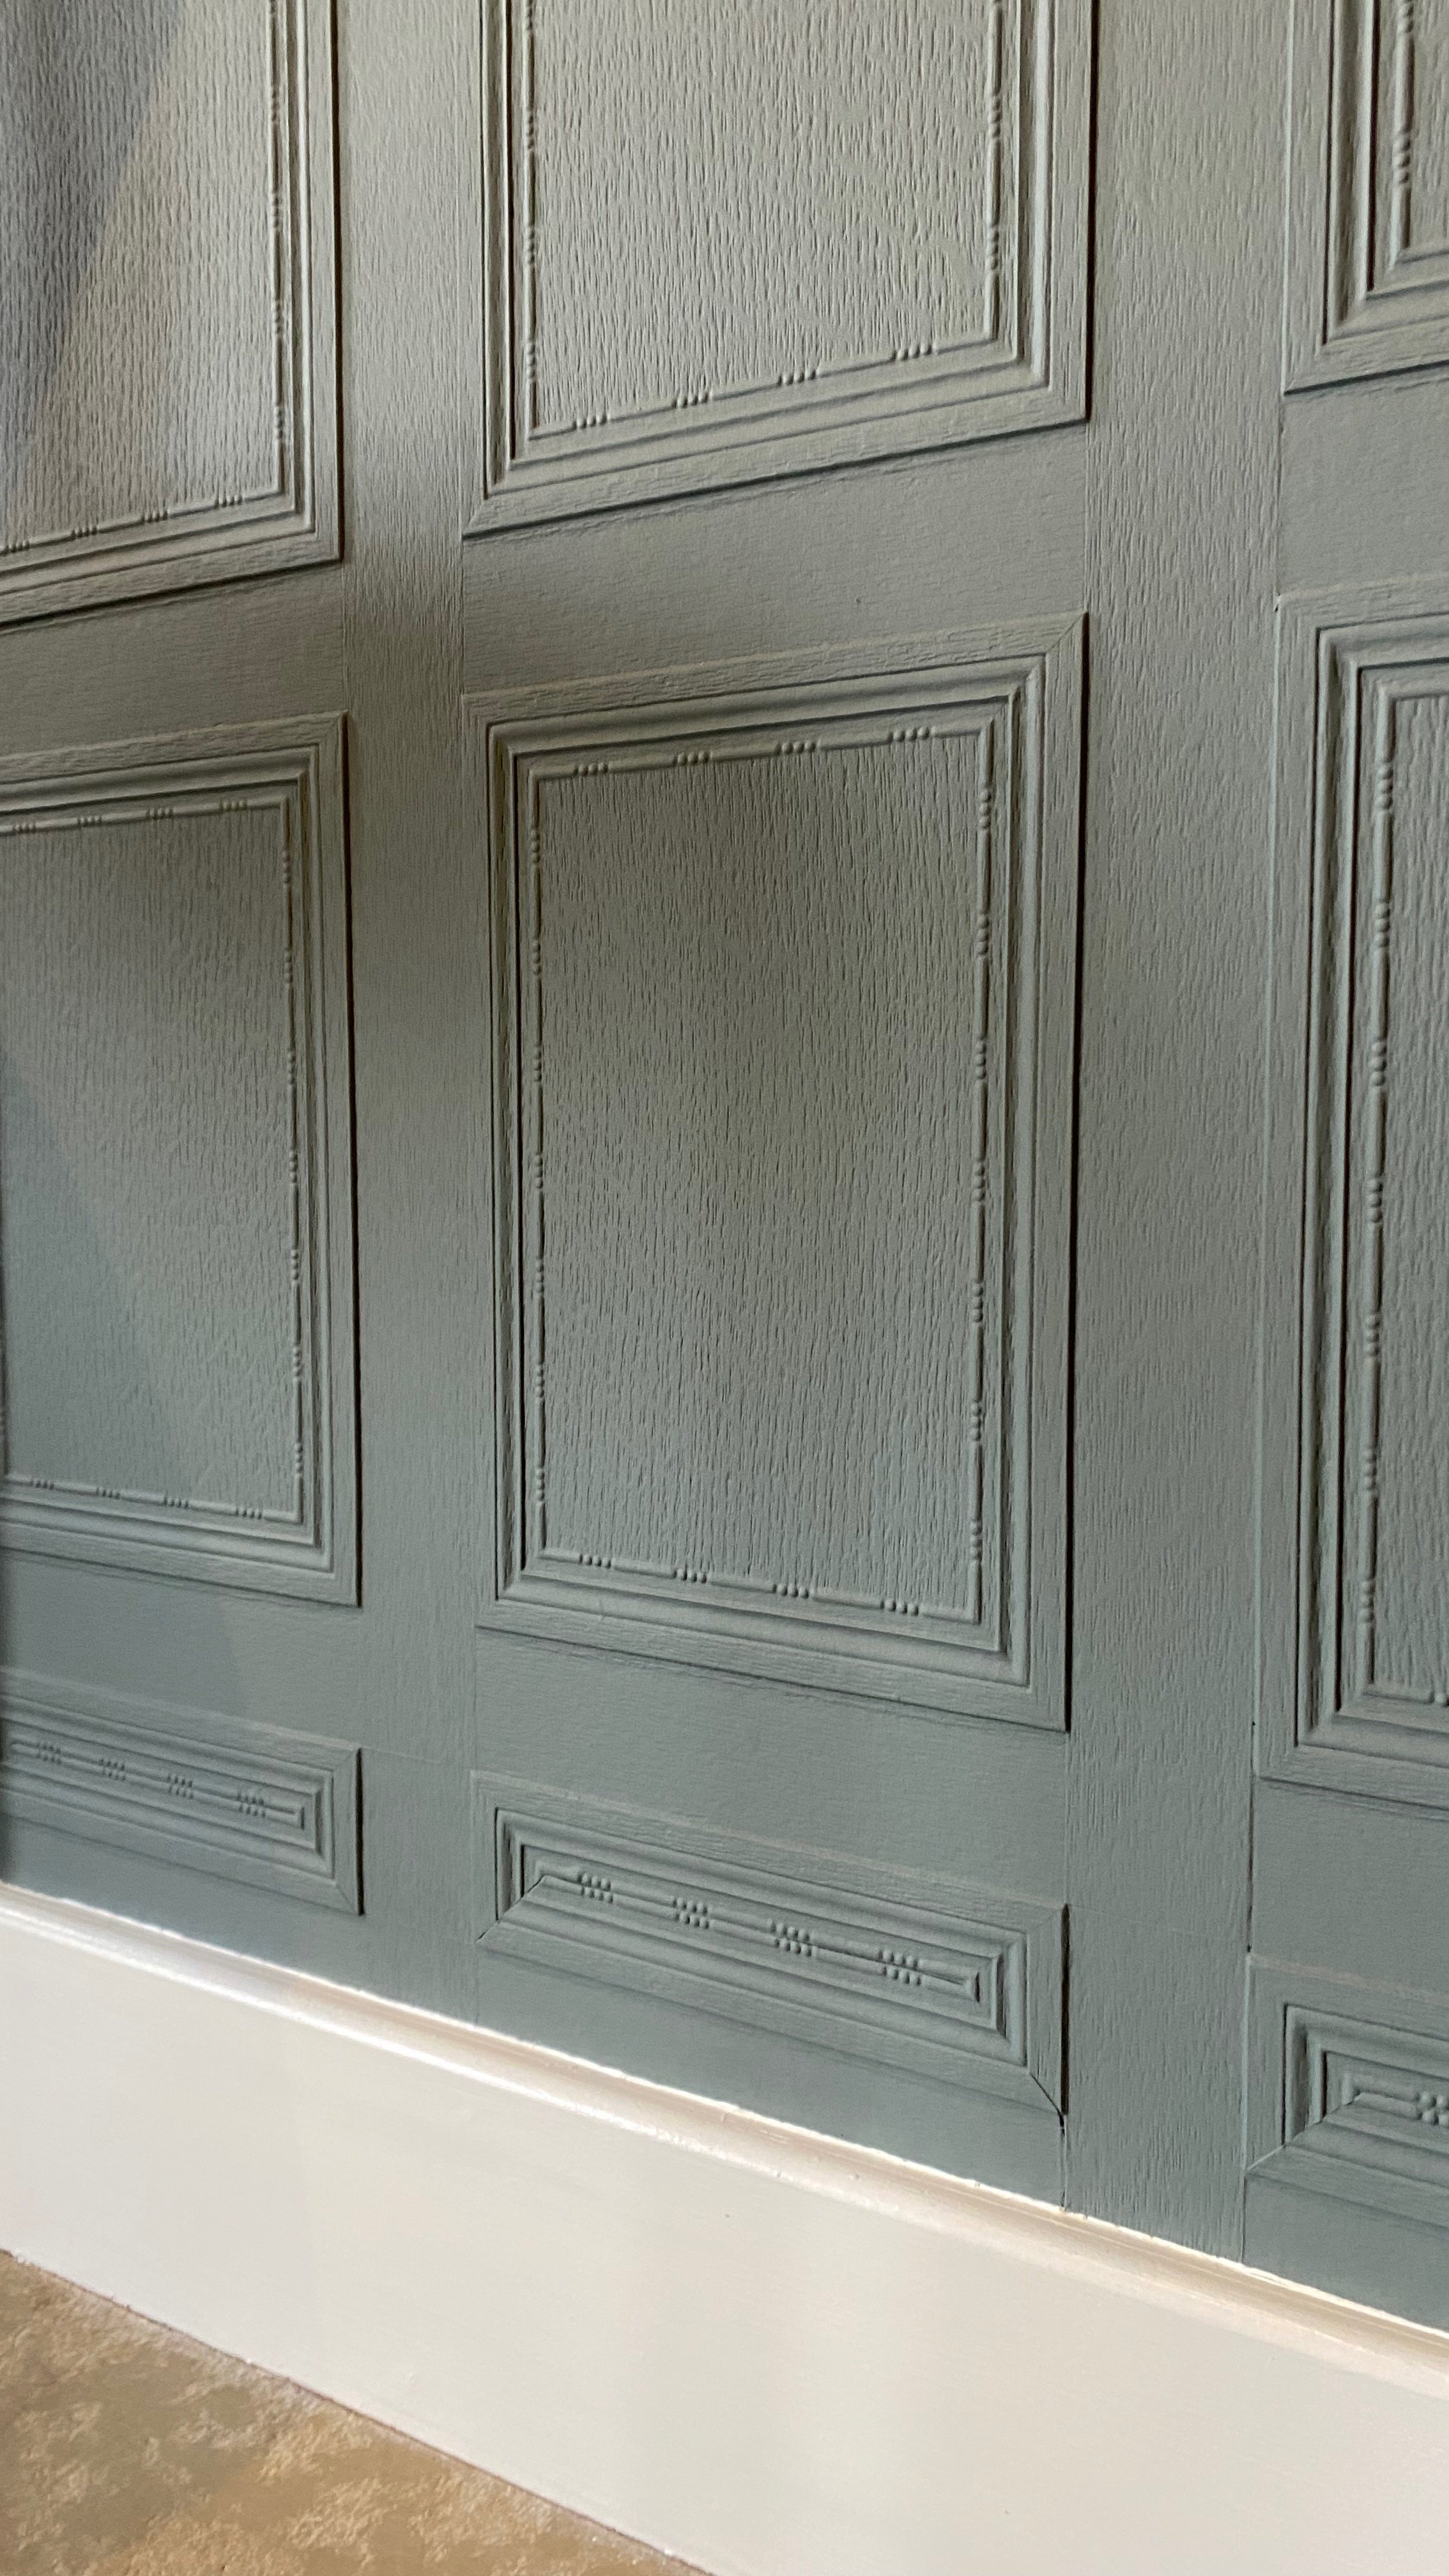 Lincrusta panels reduced in size at skirting level for an authentic panelled look